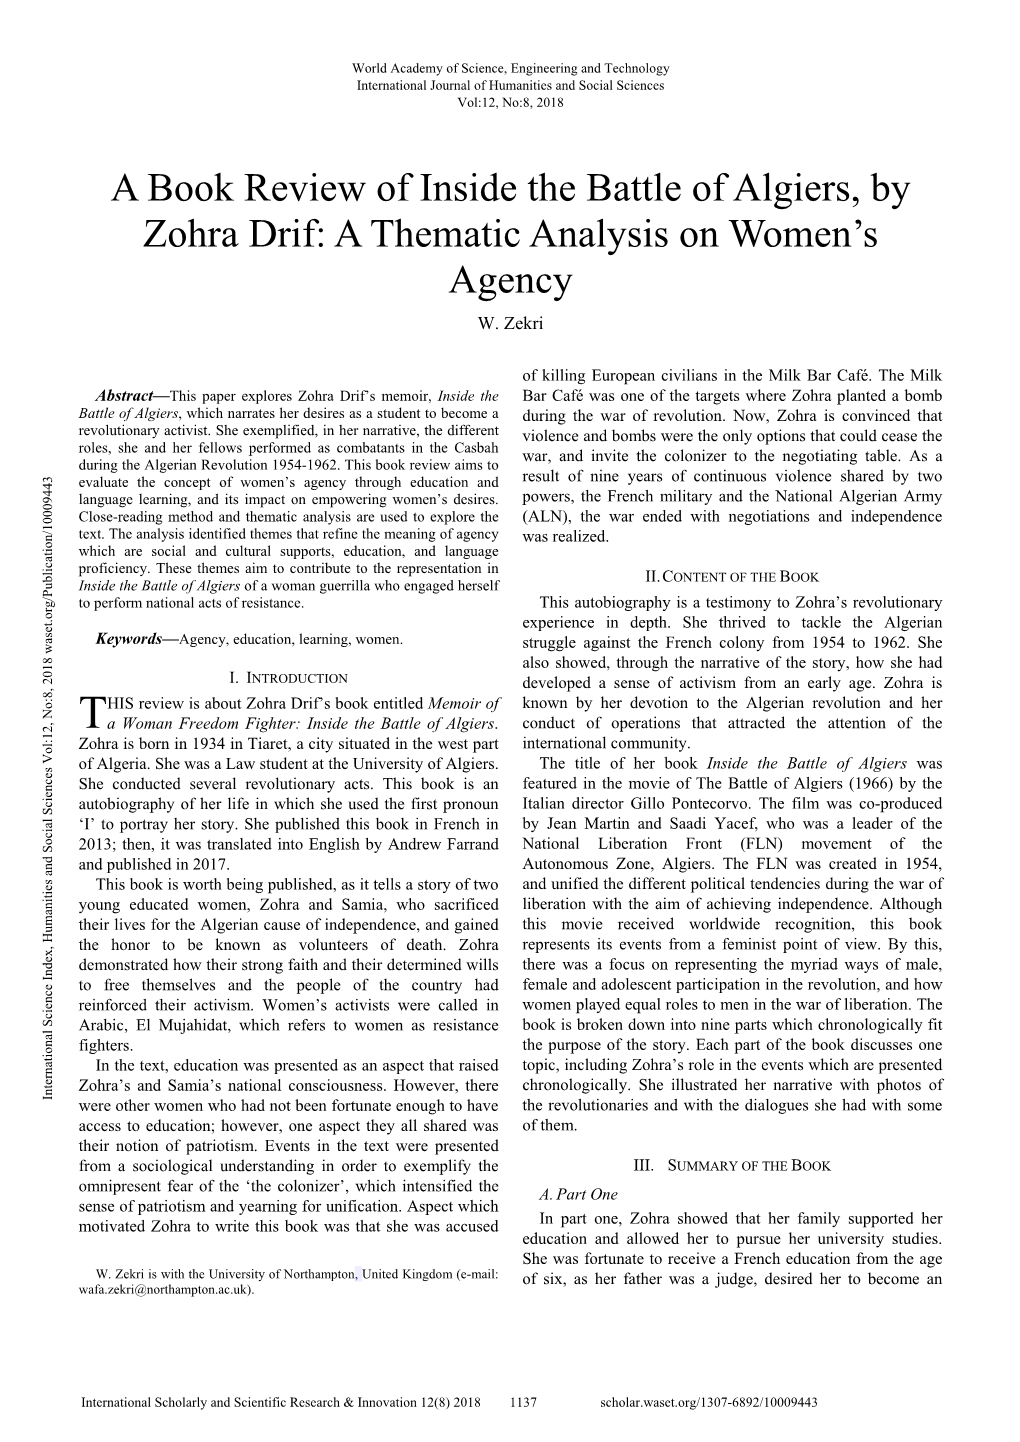 A Book Review of Inside the Battle of Algiers, by Zohra Drif: a Thematic Analysis on Women’S Agency W